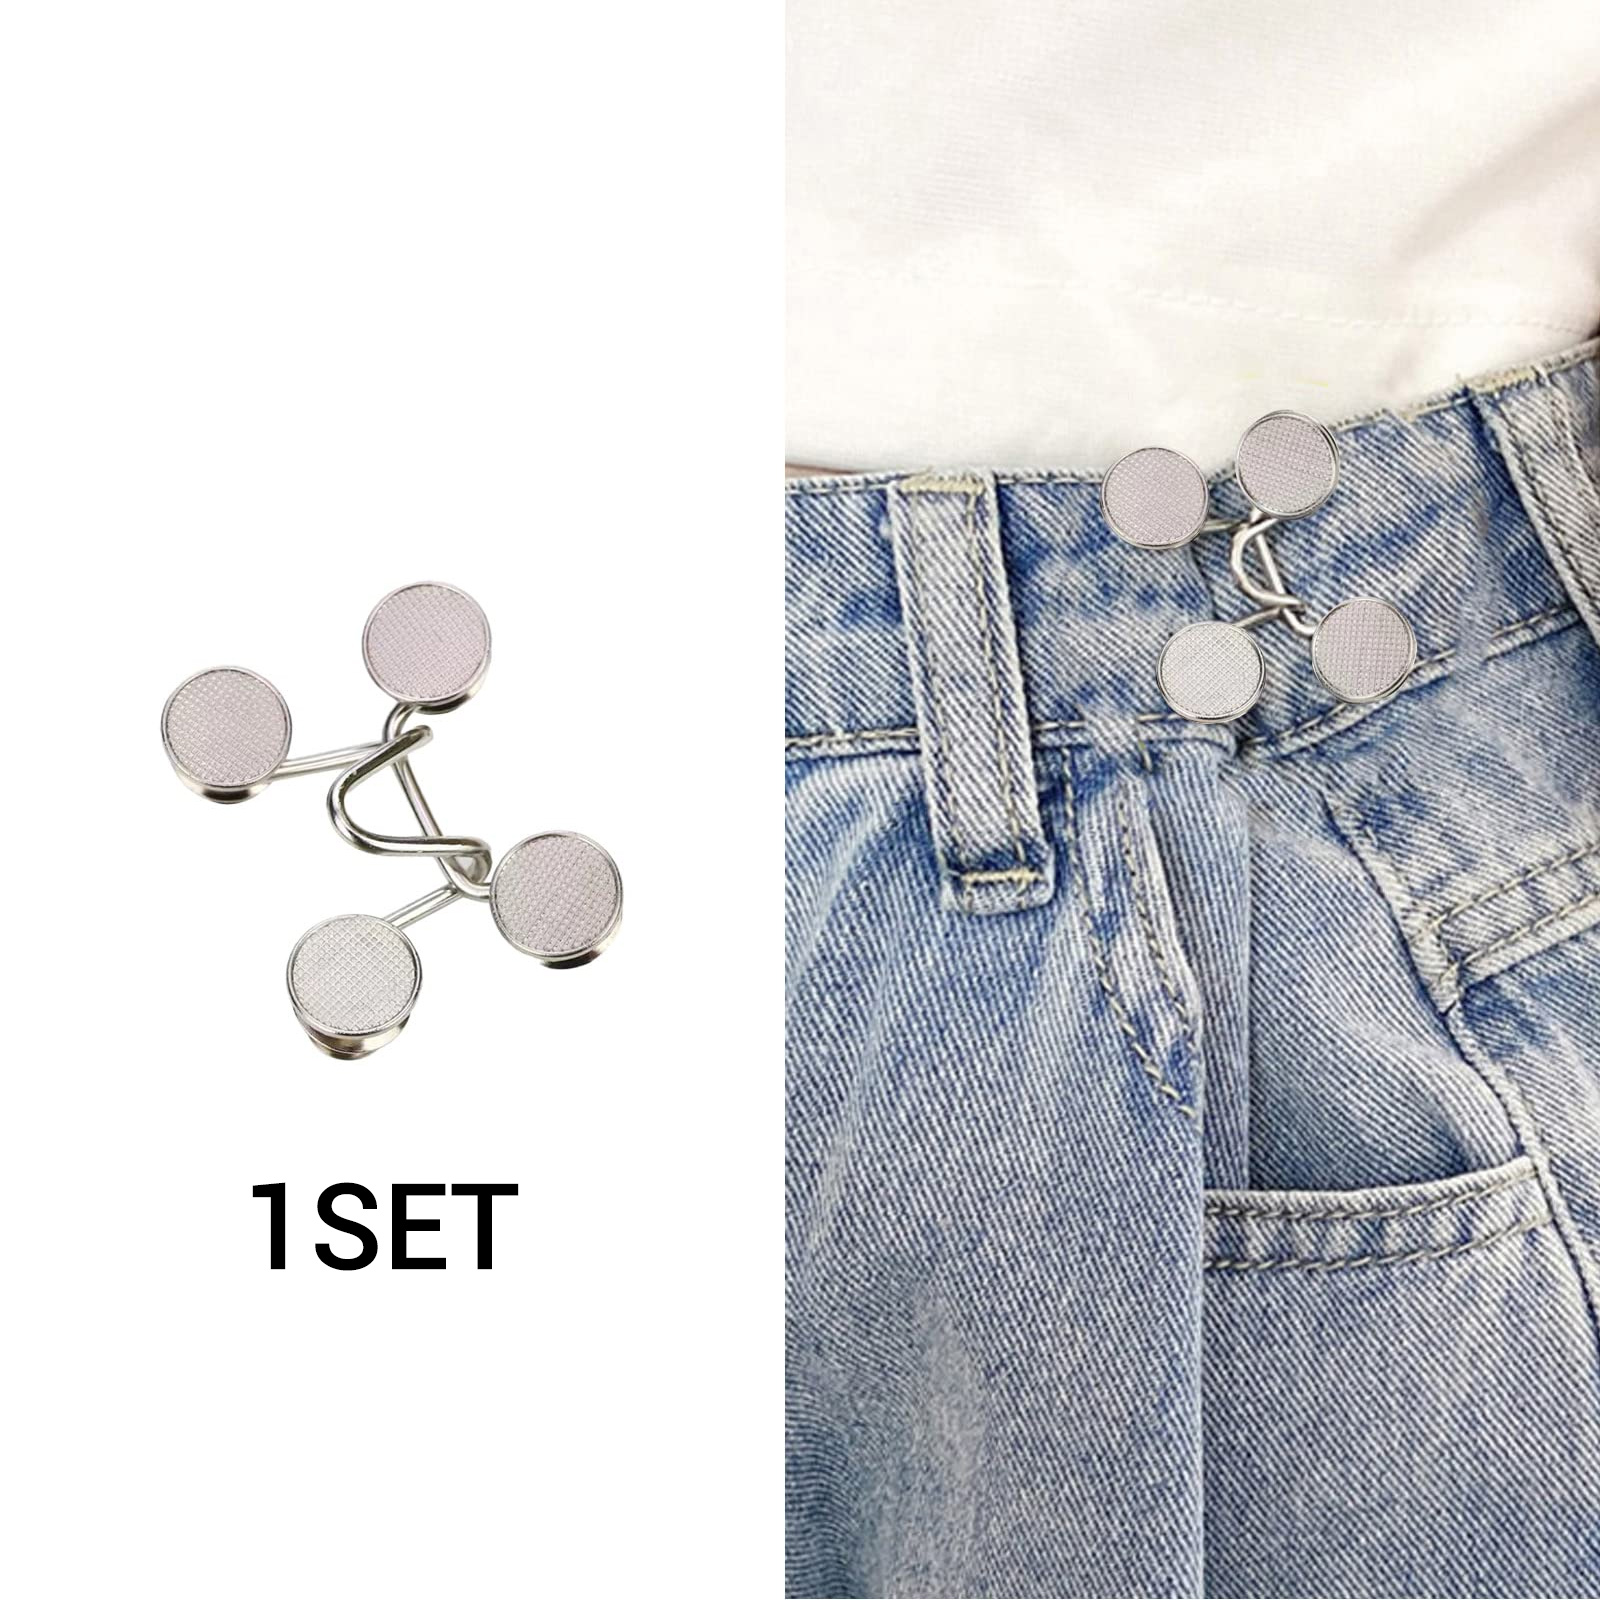 2 Sets Pant Waist Tightener Instant Jean Buttons For Loose Jeans